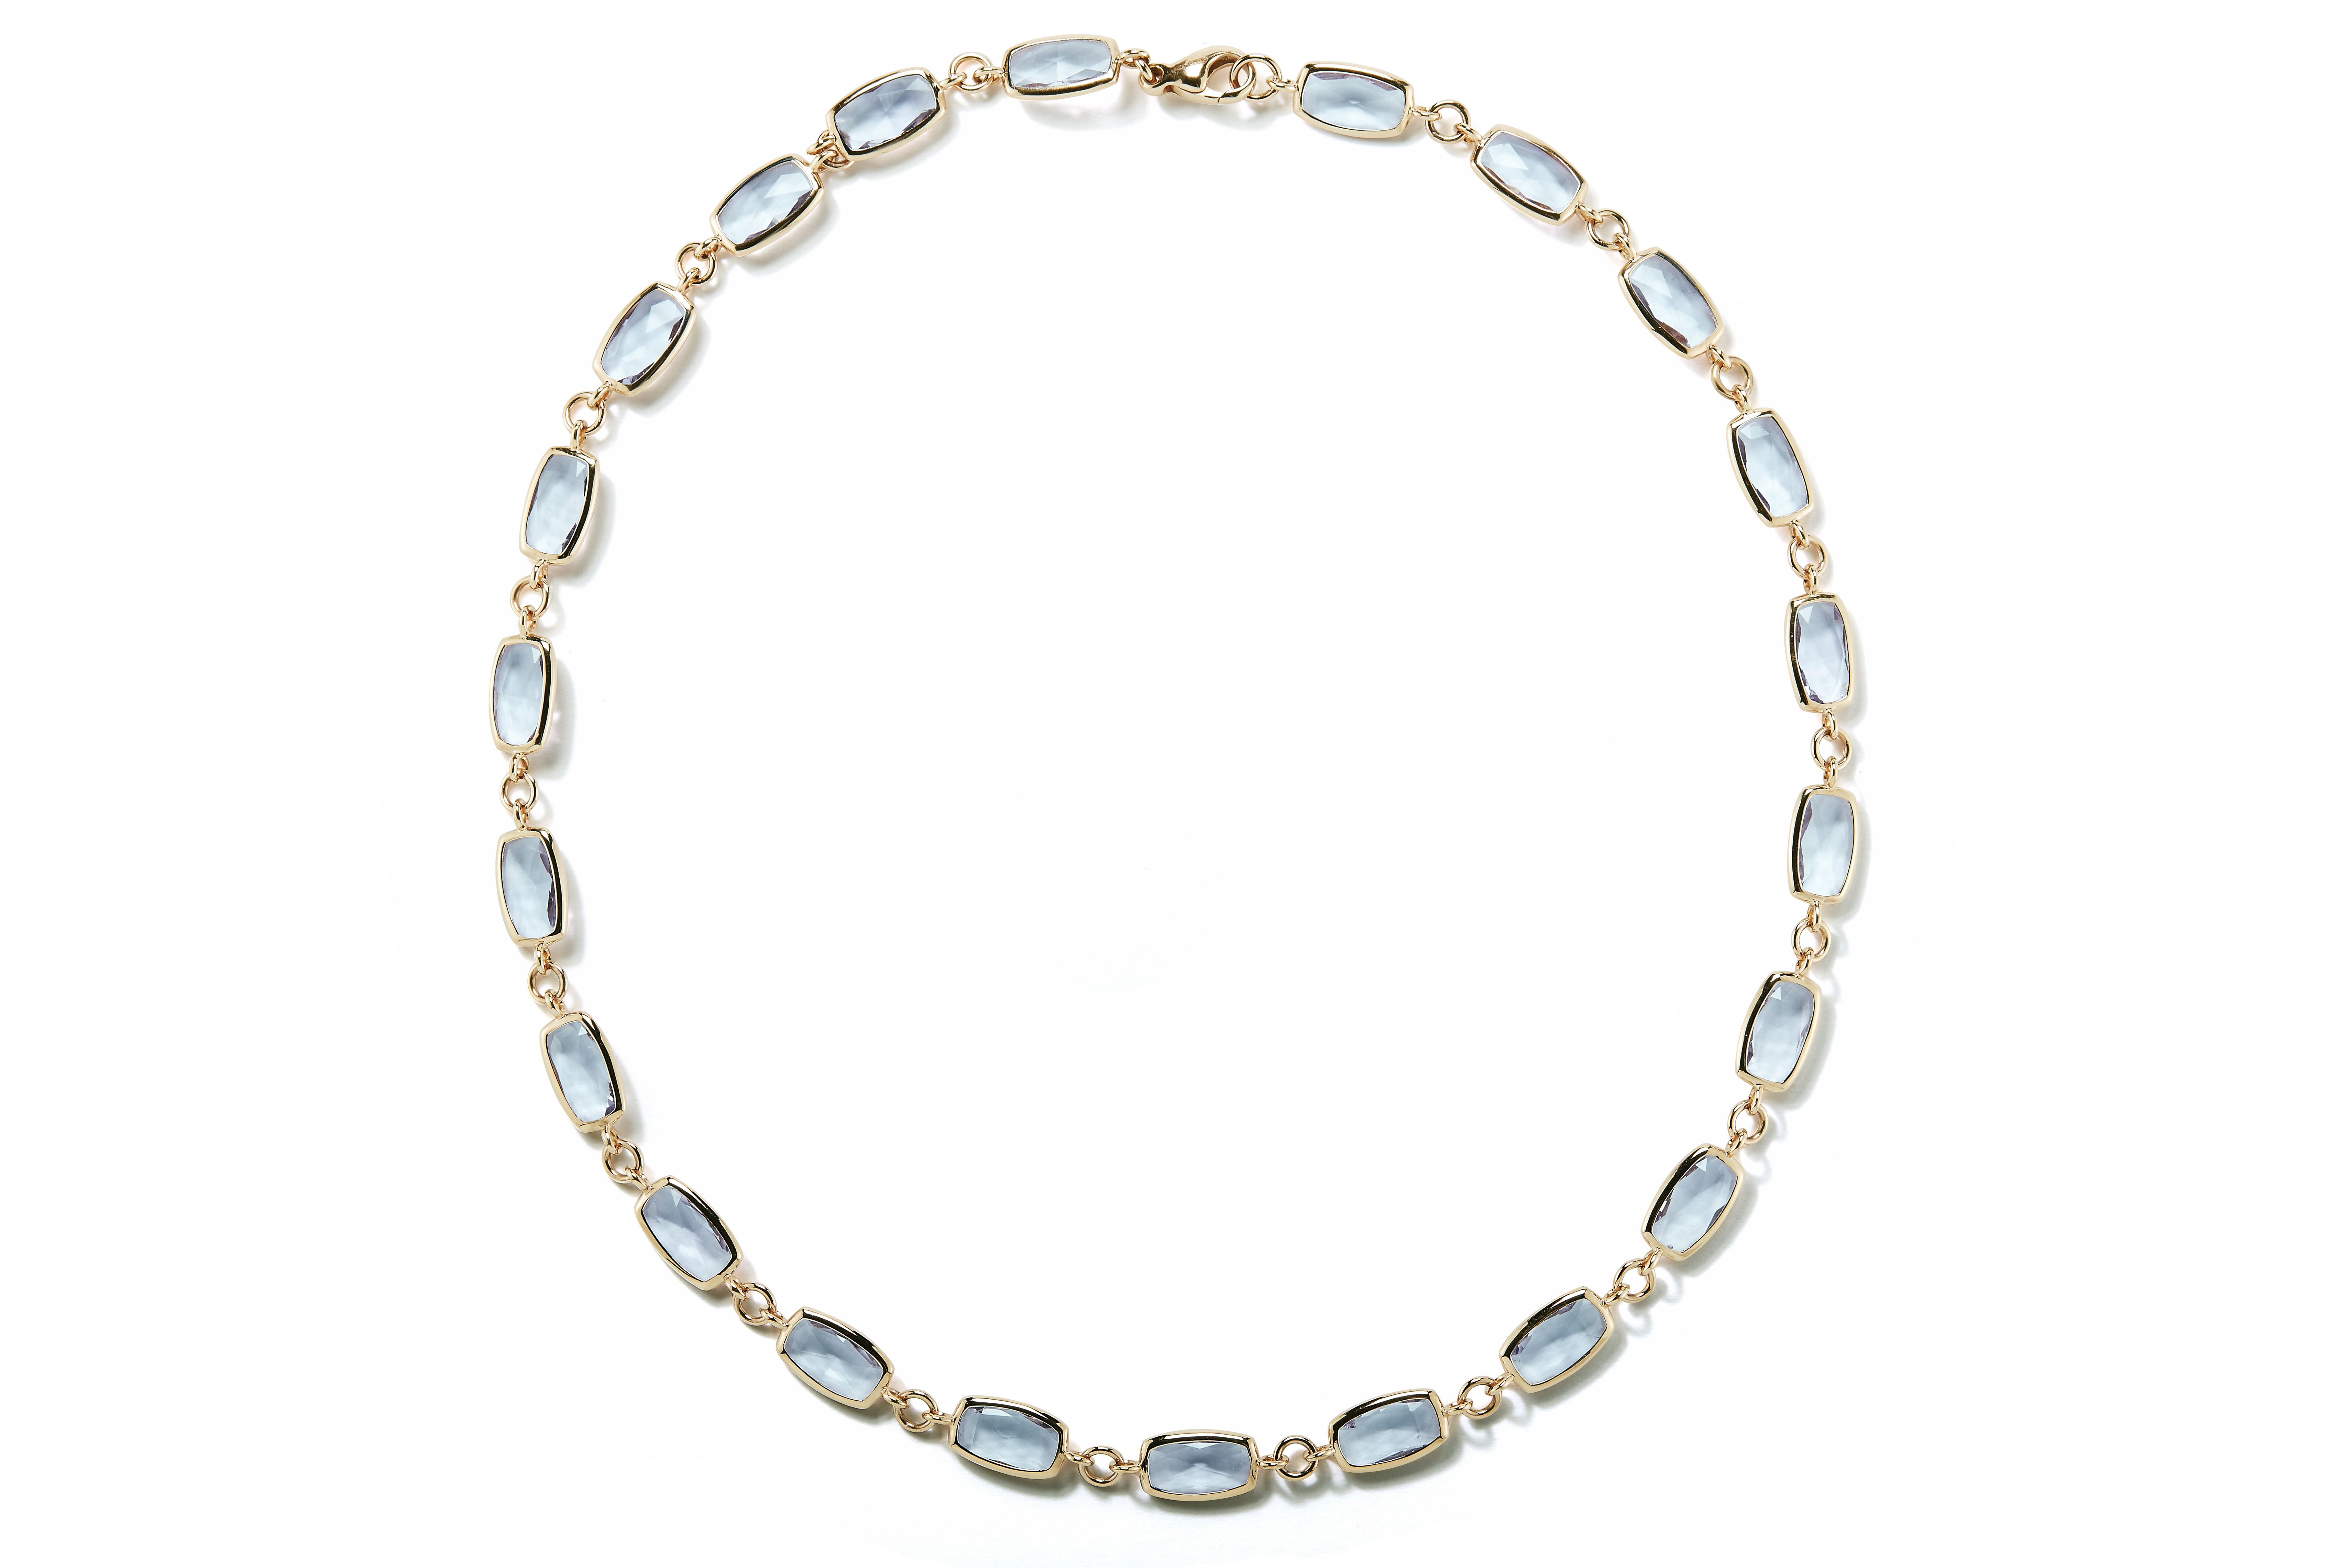 A & Furst 18k Yellow Gold Necklace With Blue Topaz